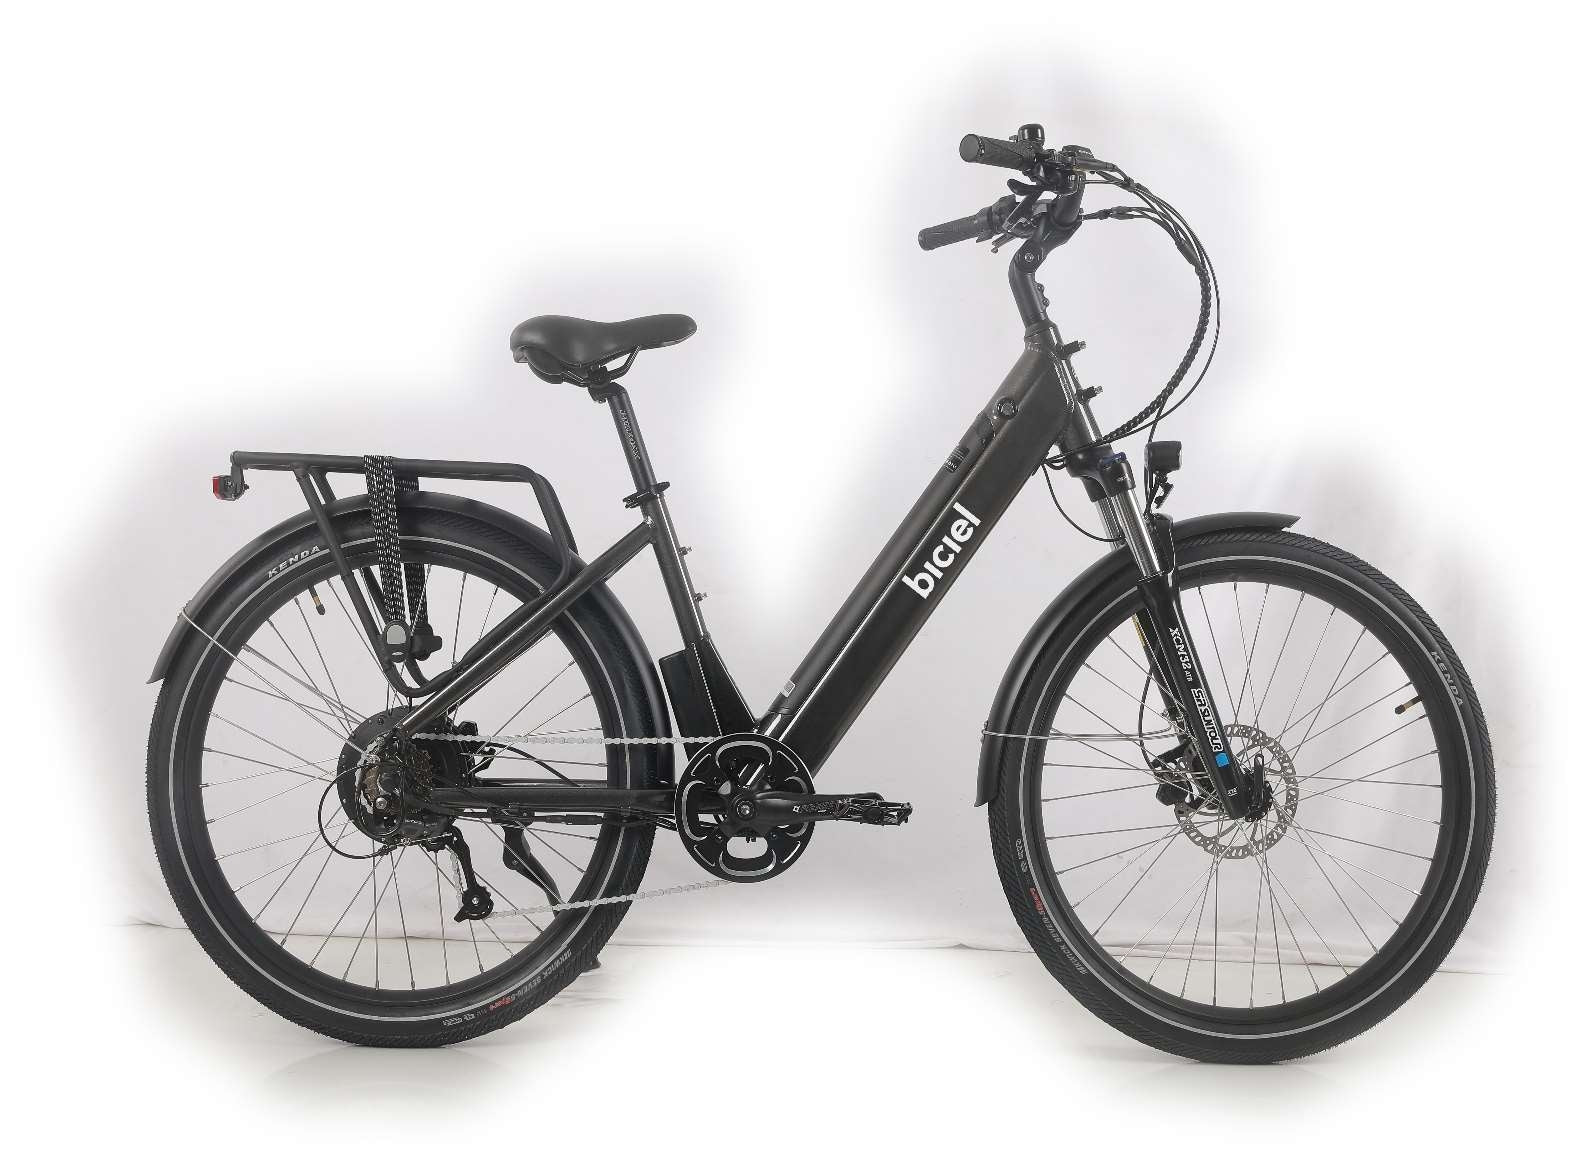 How Much Does It Cost To Charge An E-bike?